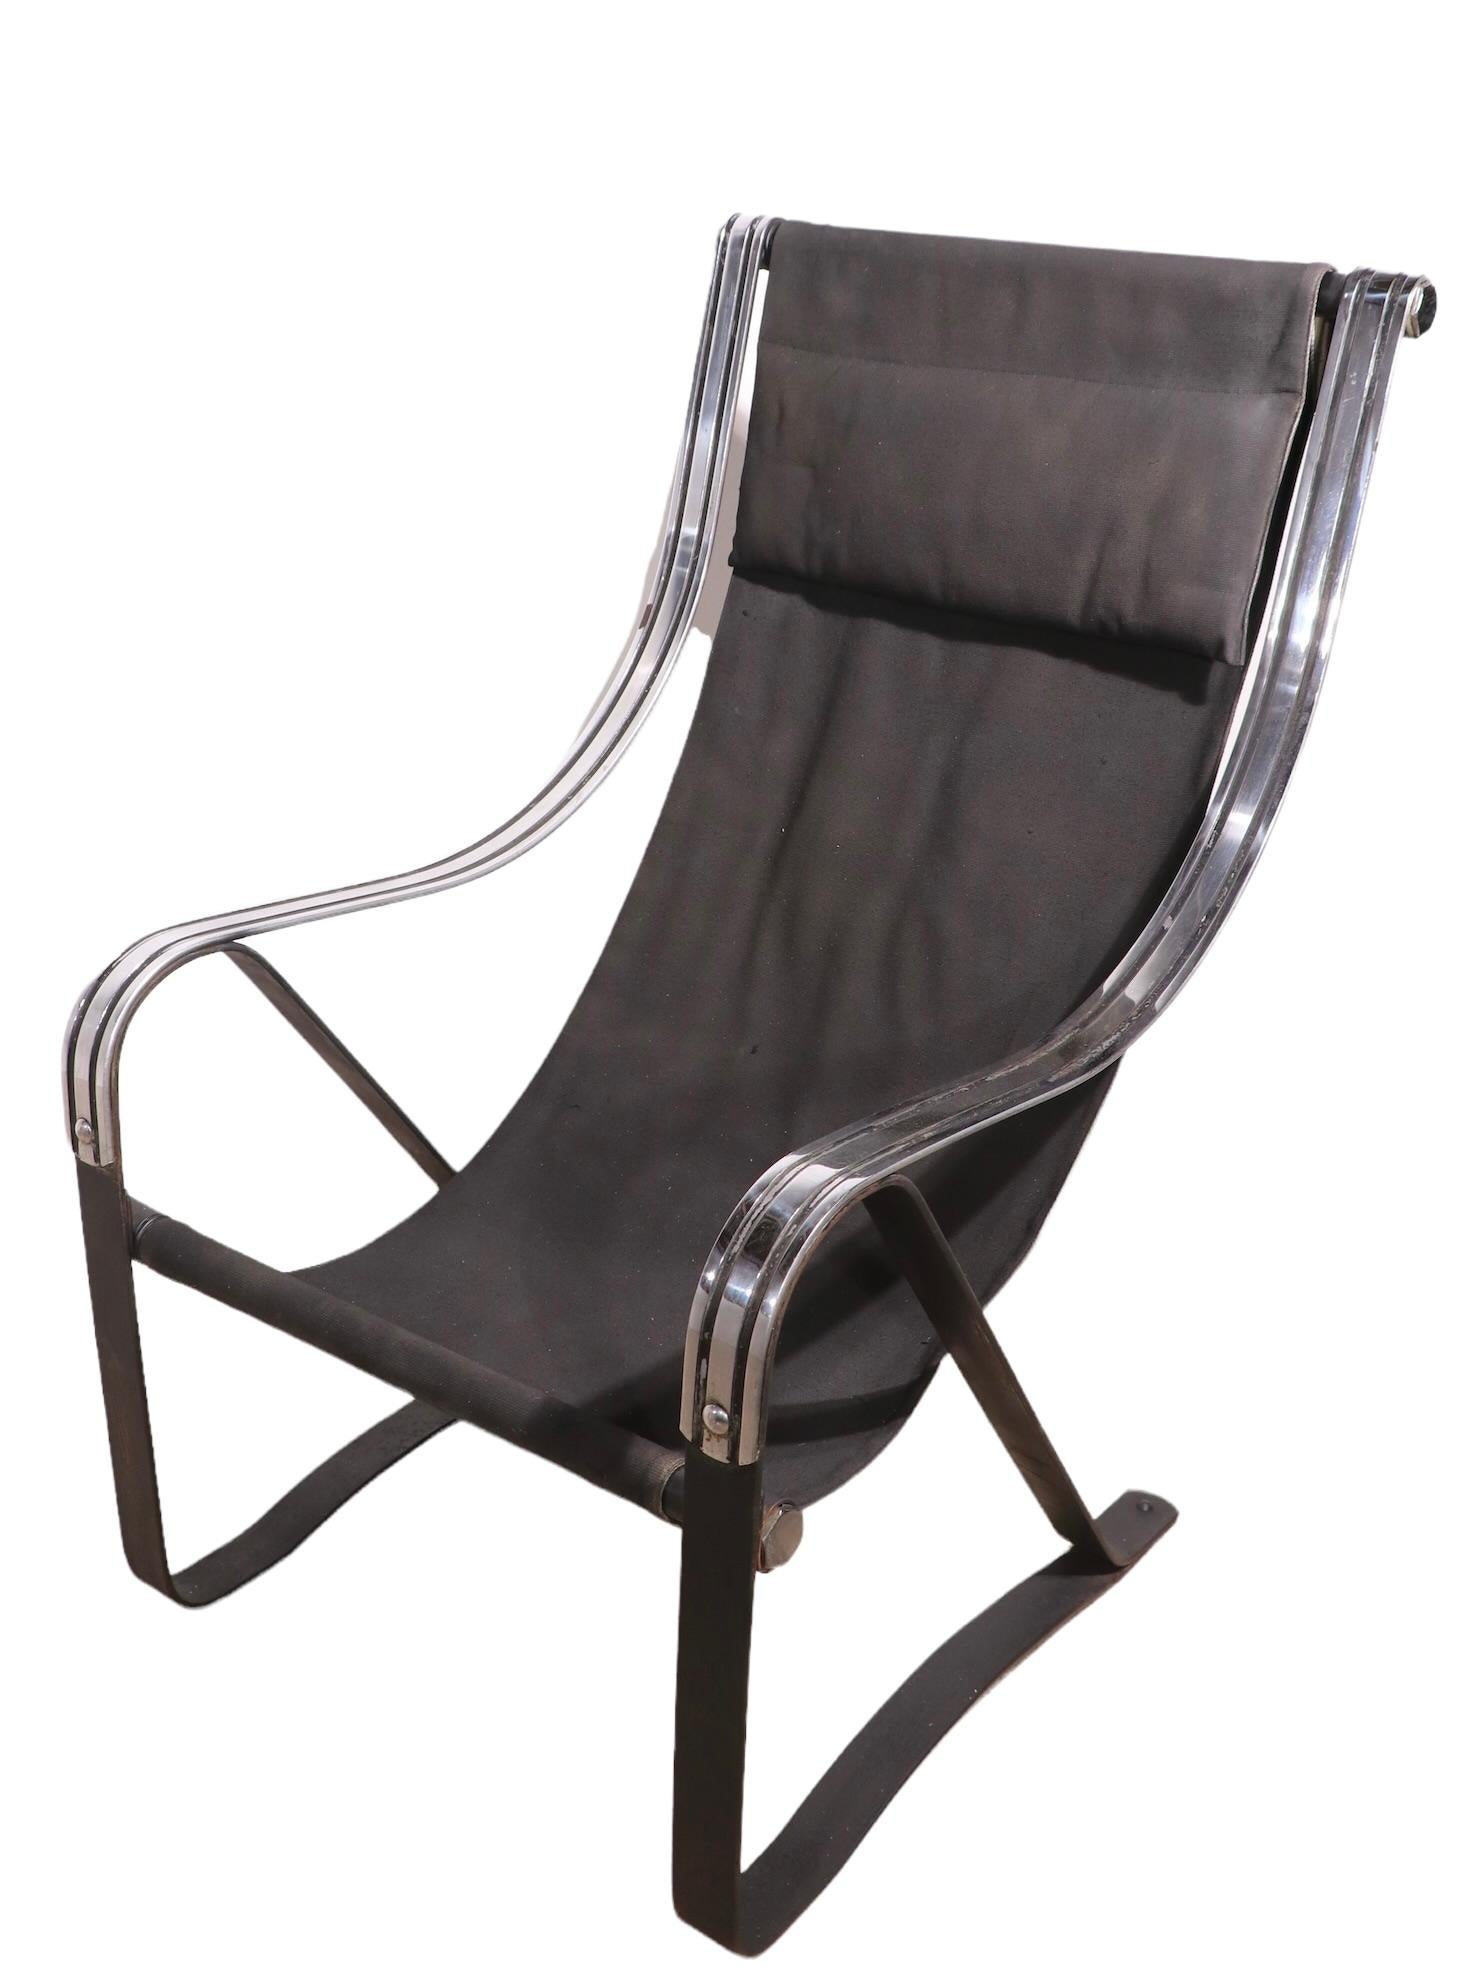 Art Deco Machine Age Sling Chair by McKay Craft Furniture Company In Good Condition For Sale In New York, NY